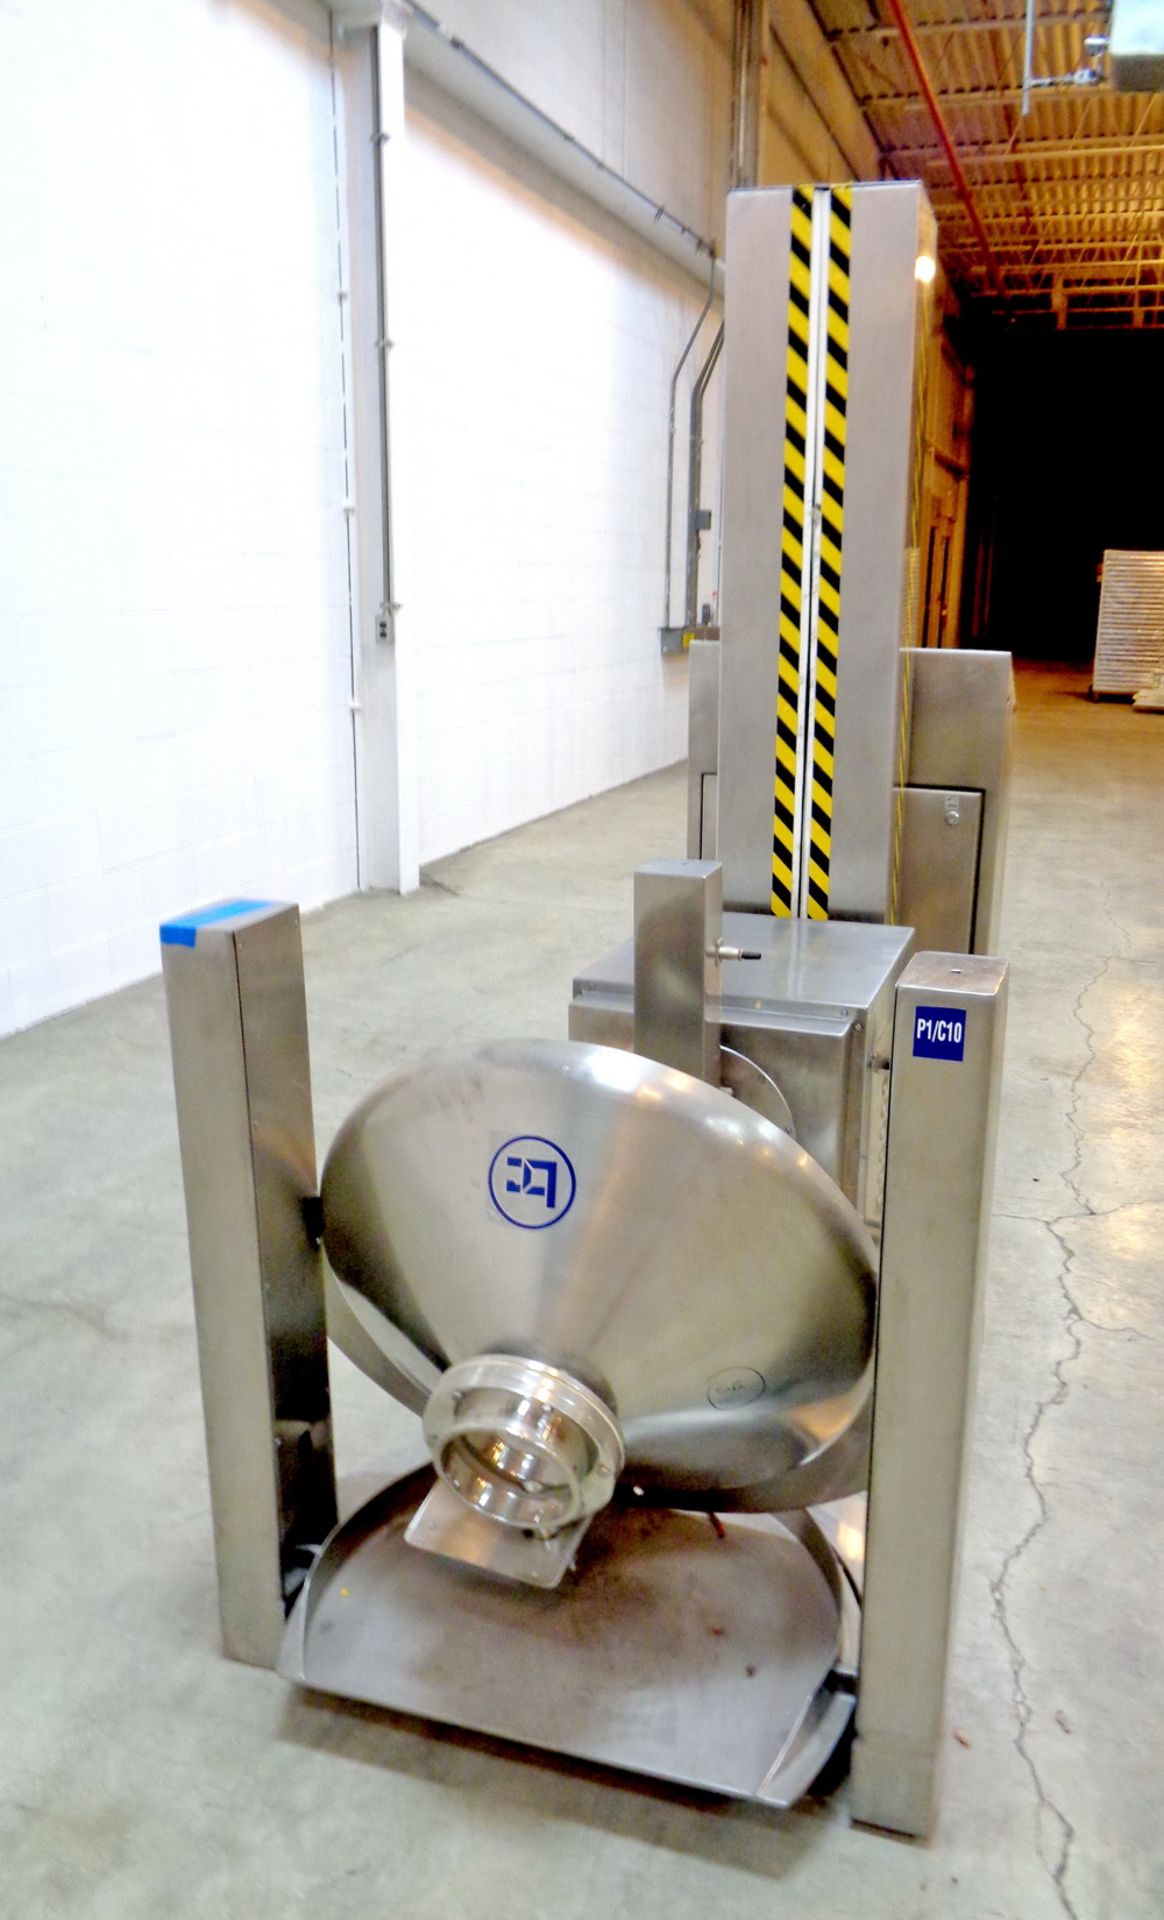 Bectochem Portable Drum Lifter and Manipulator, Model GMP, S/N 213/10221.09.06 - Image 3 of 6